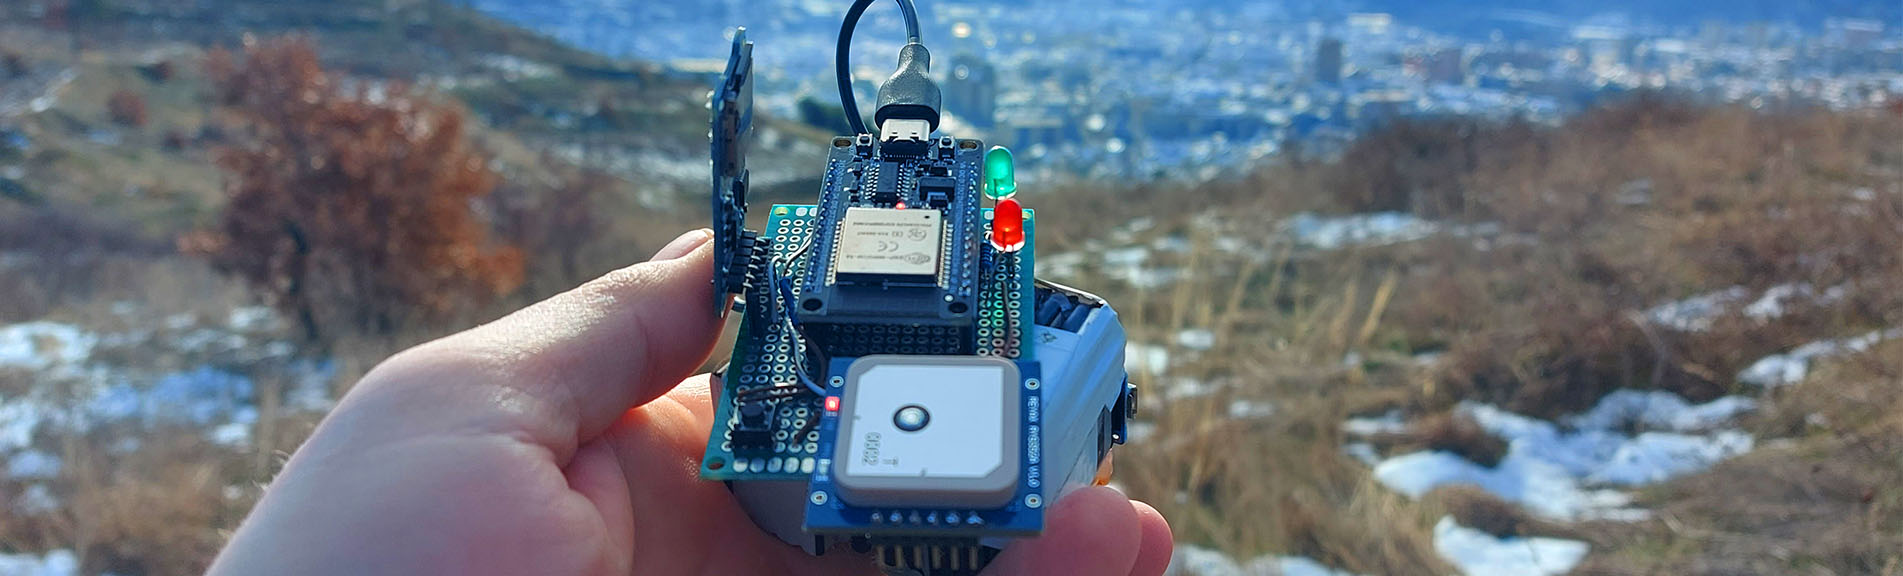 Trail mapping with GPS, ESP32 and microSD card